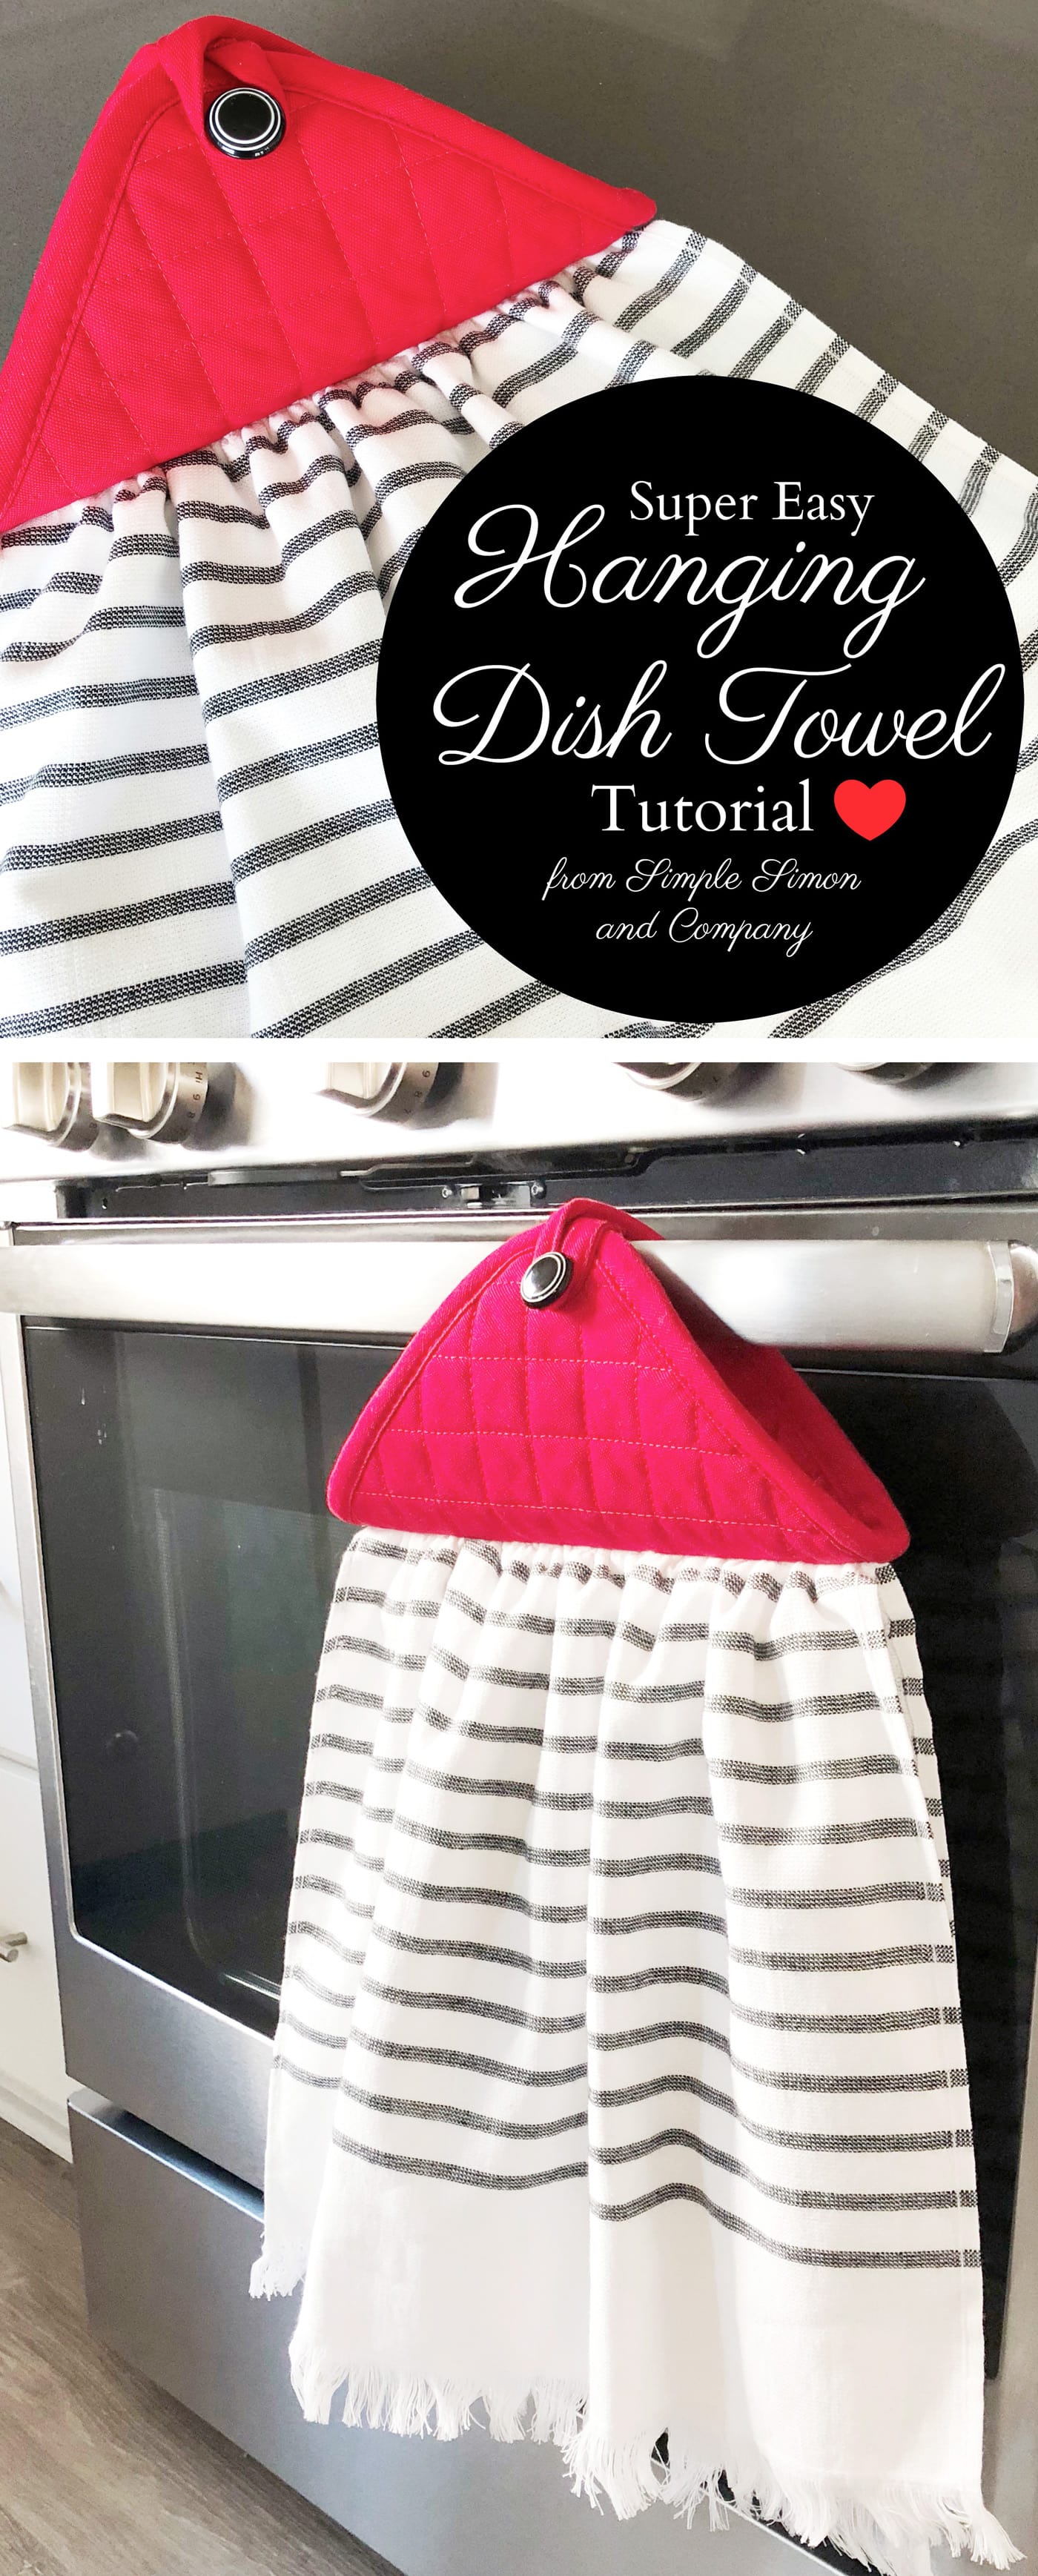 How To Make Hanging Kitchen Towels (2 Ways - Gathered Or Folded